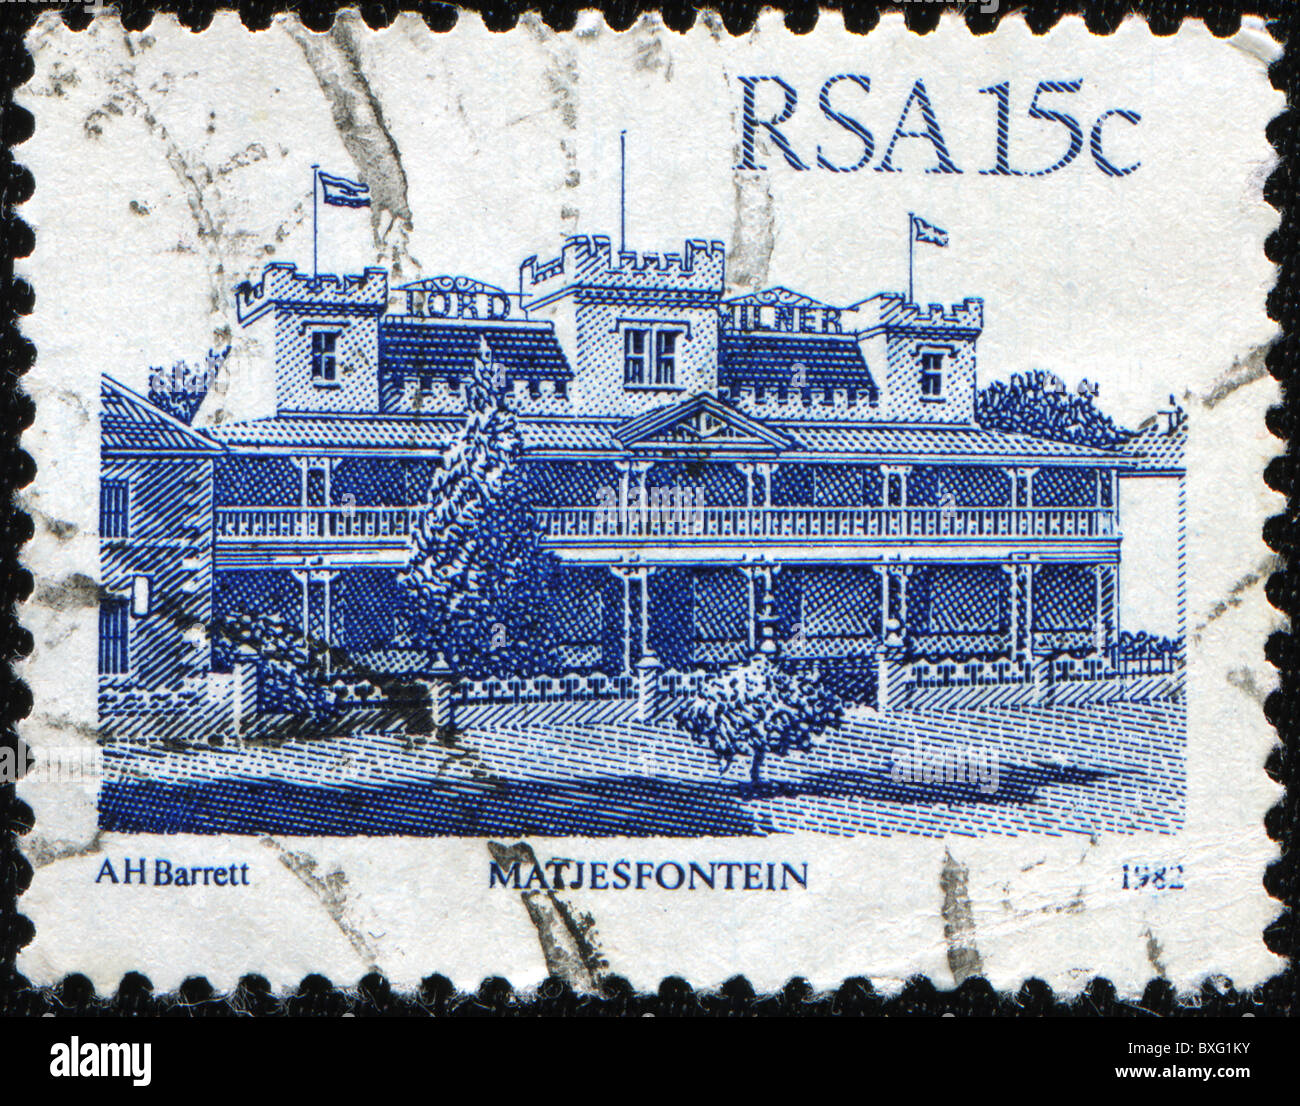 RSA - CIRCA 1982: A stamp printed in Republic of South Africa shows Matjesfontein - Lord Milner Hotel, circa 1982 Stock Photo